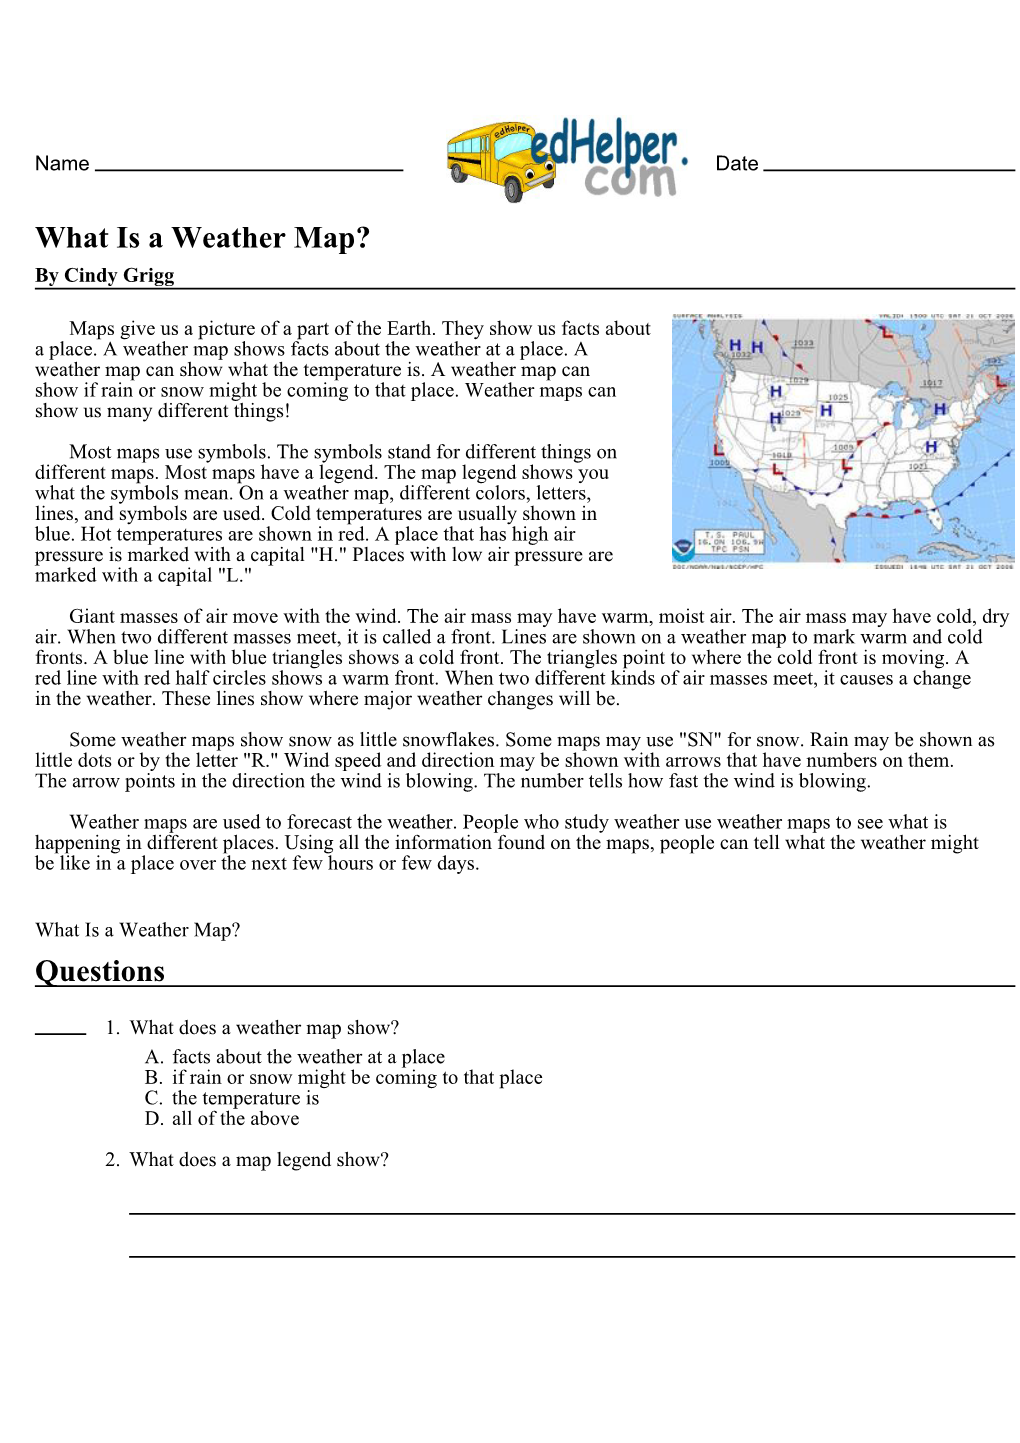 What Is a Weather Map? Questions